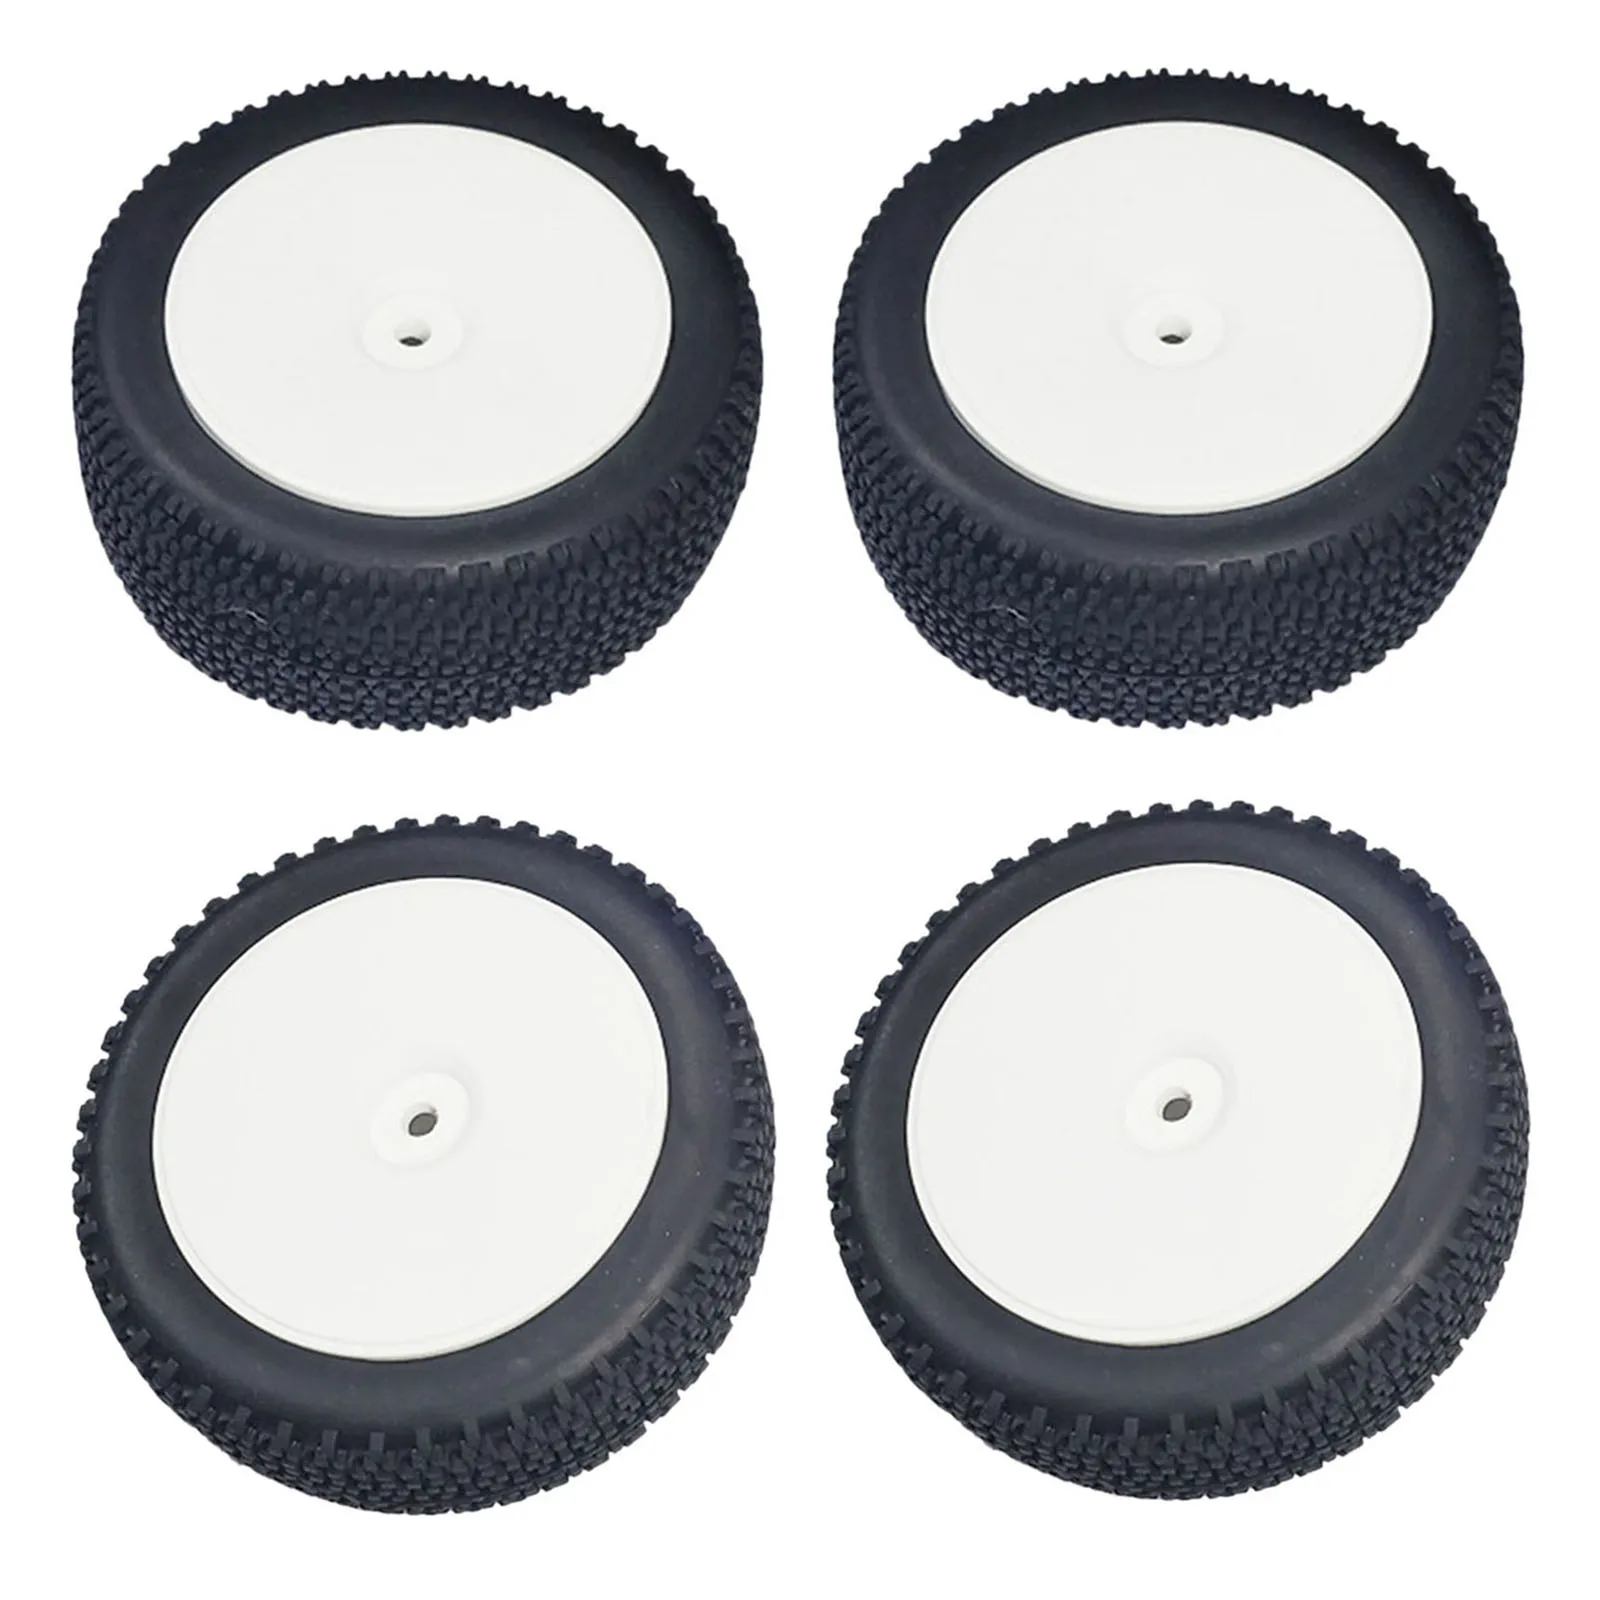 4Pcs Rubber Tires Replacements for Wltoys 144001 124018 LC Racing Emb-1 1/12 1/14 RC Hobby Car DIY Modified images - 6